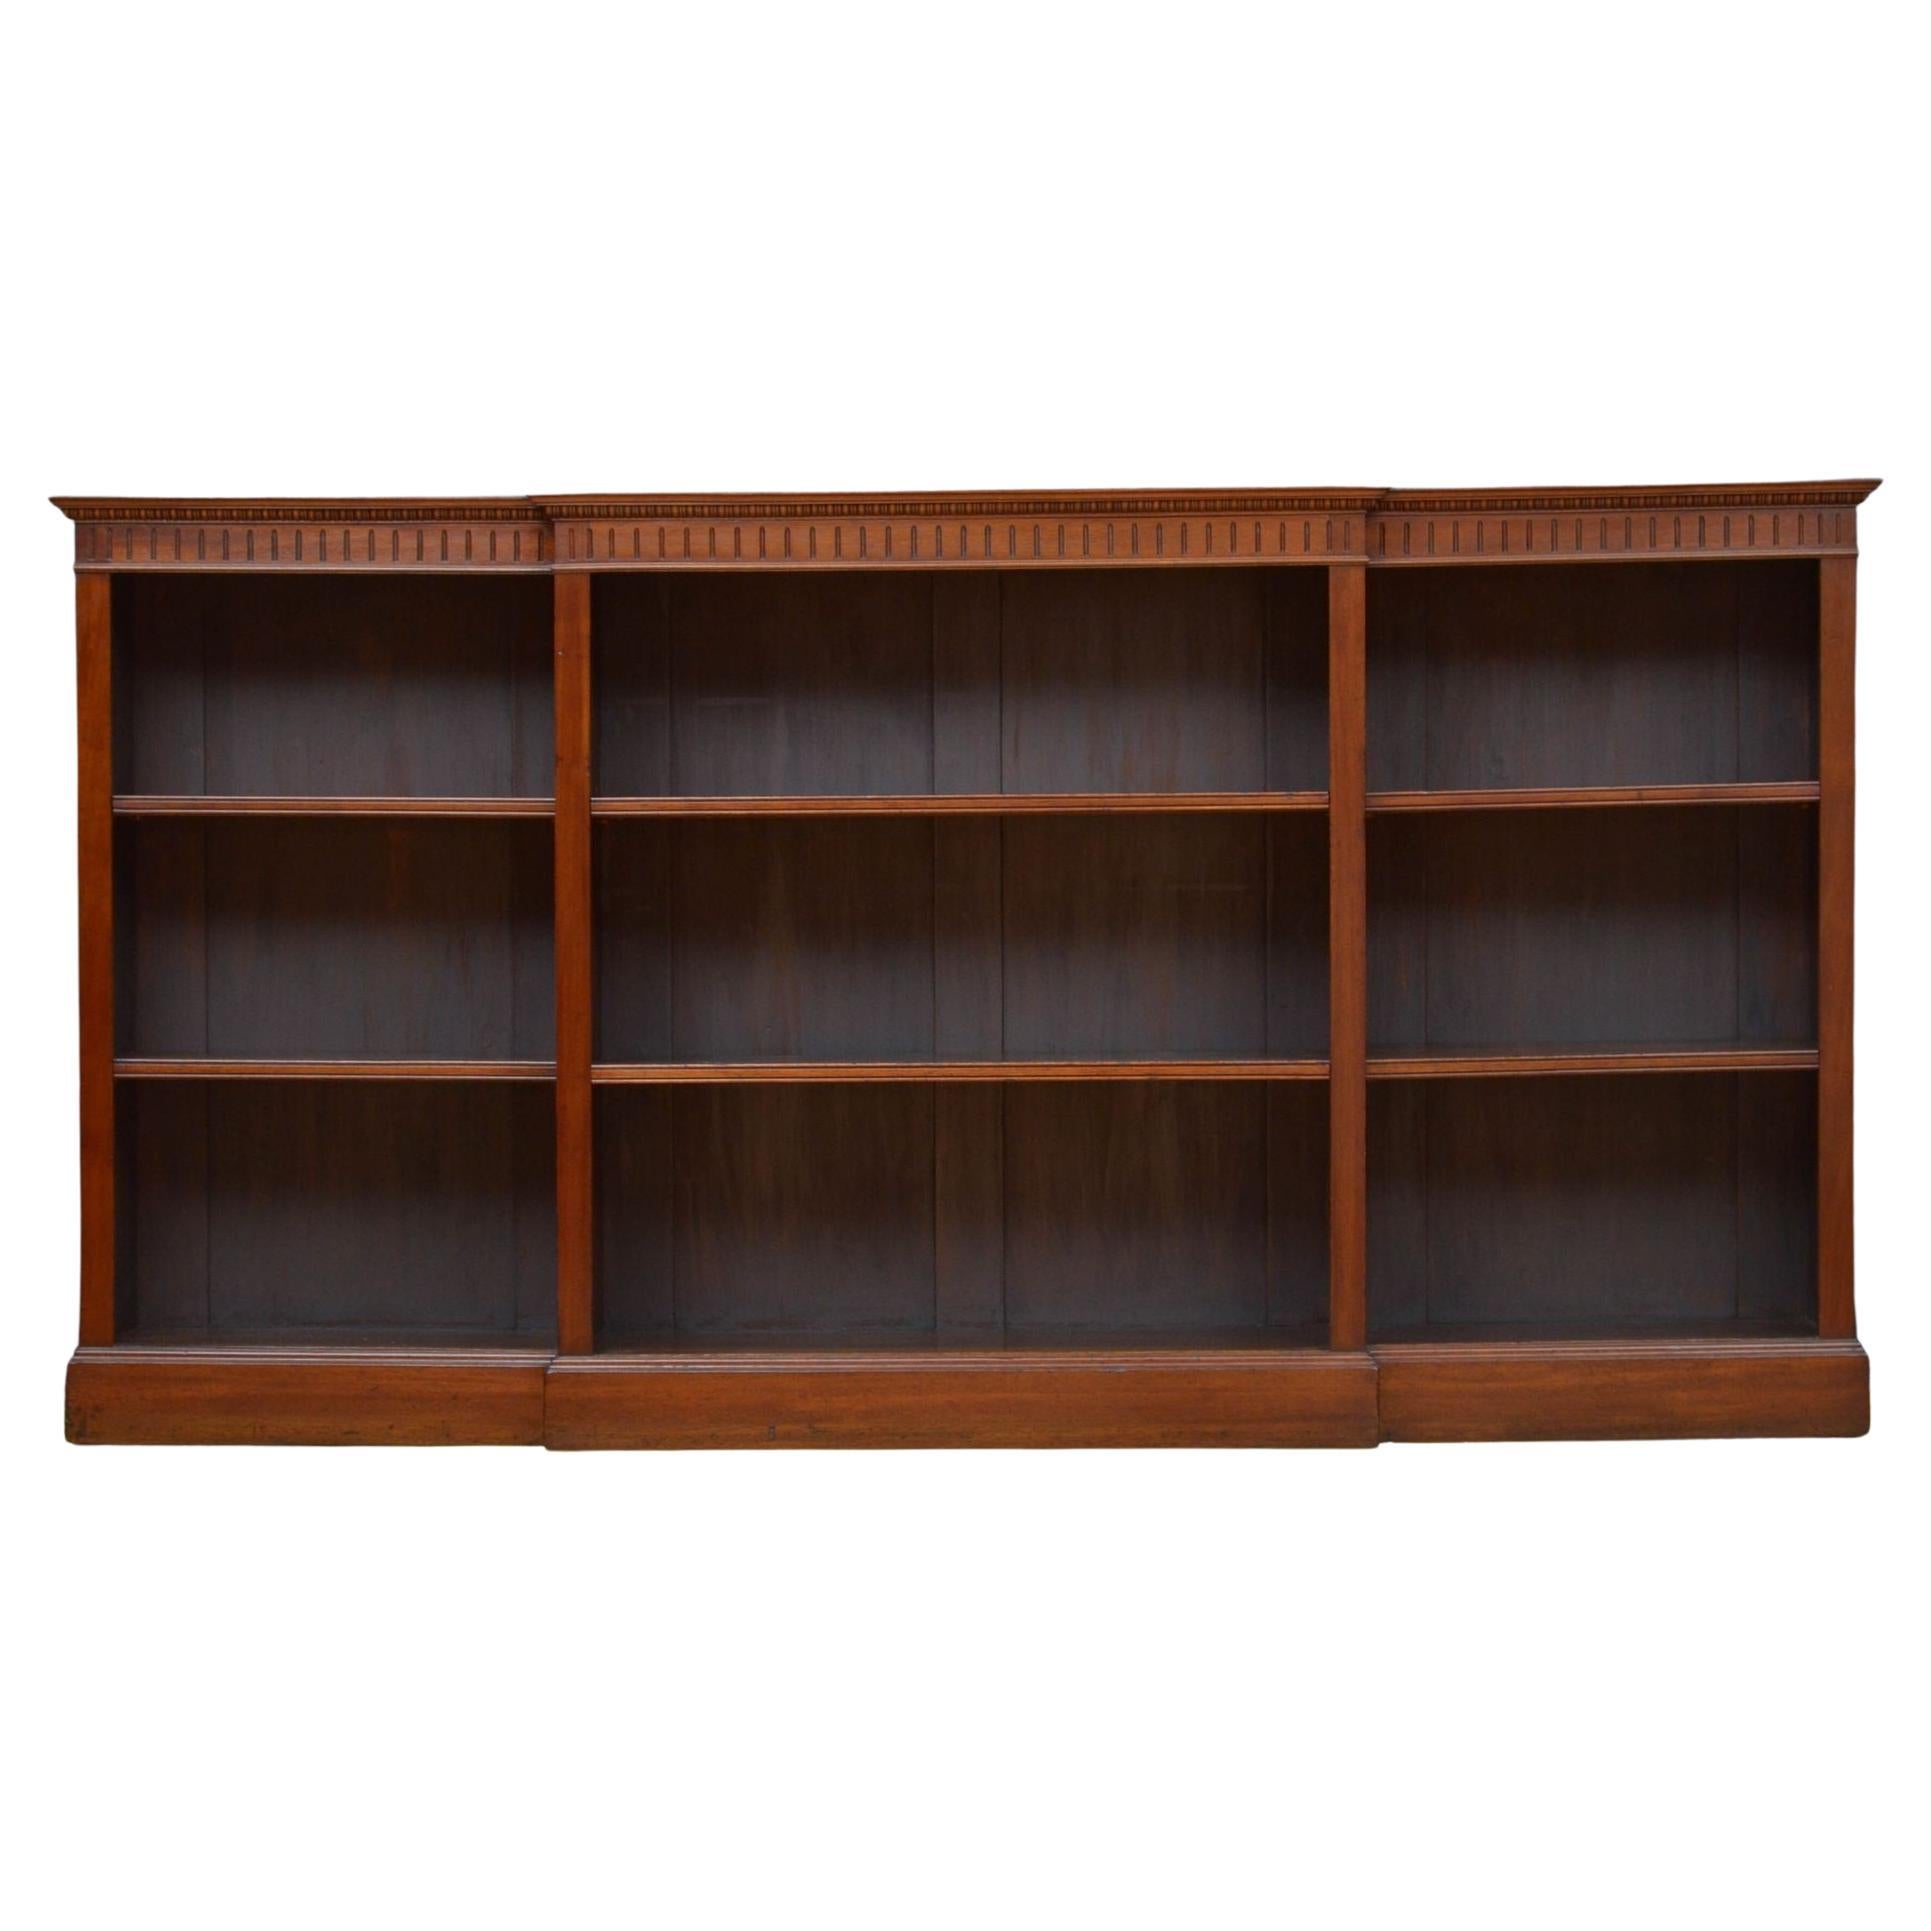 A Large Victorian Victorian Open Bookcase in Mahogany